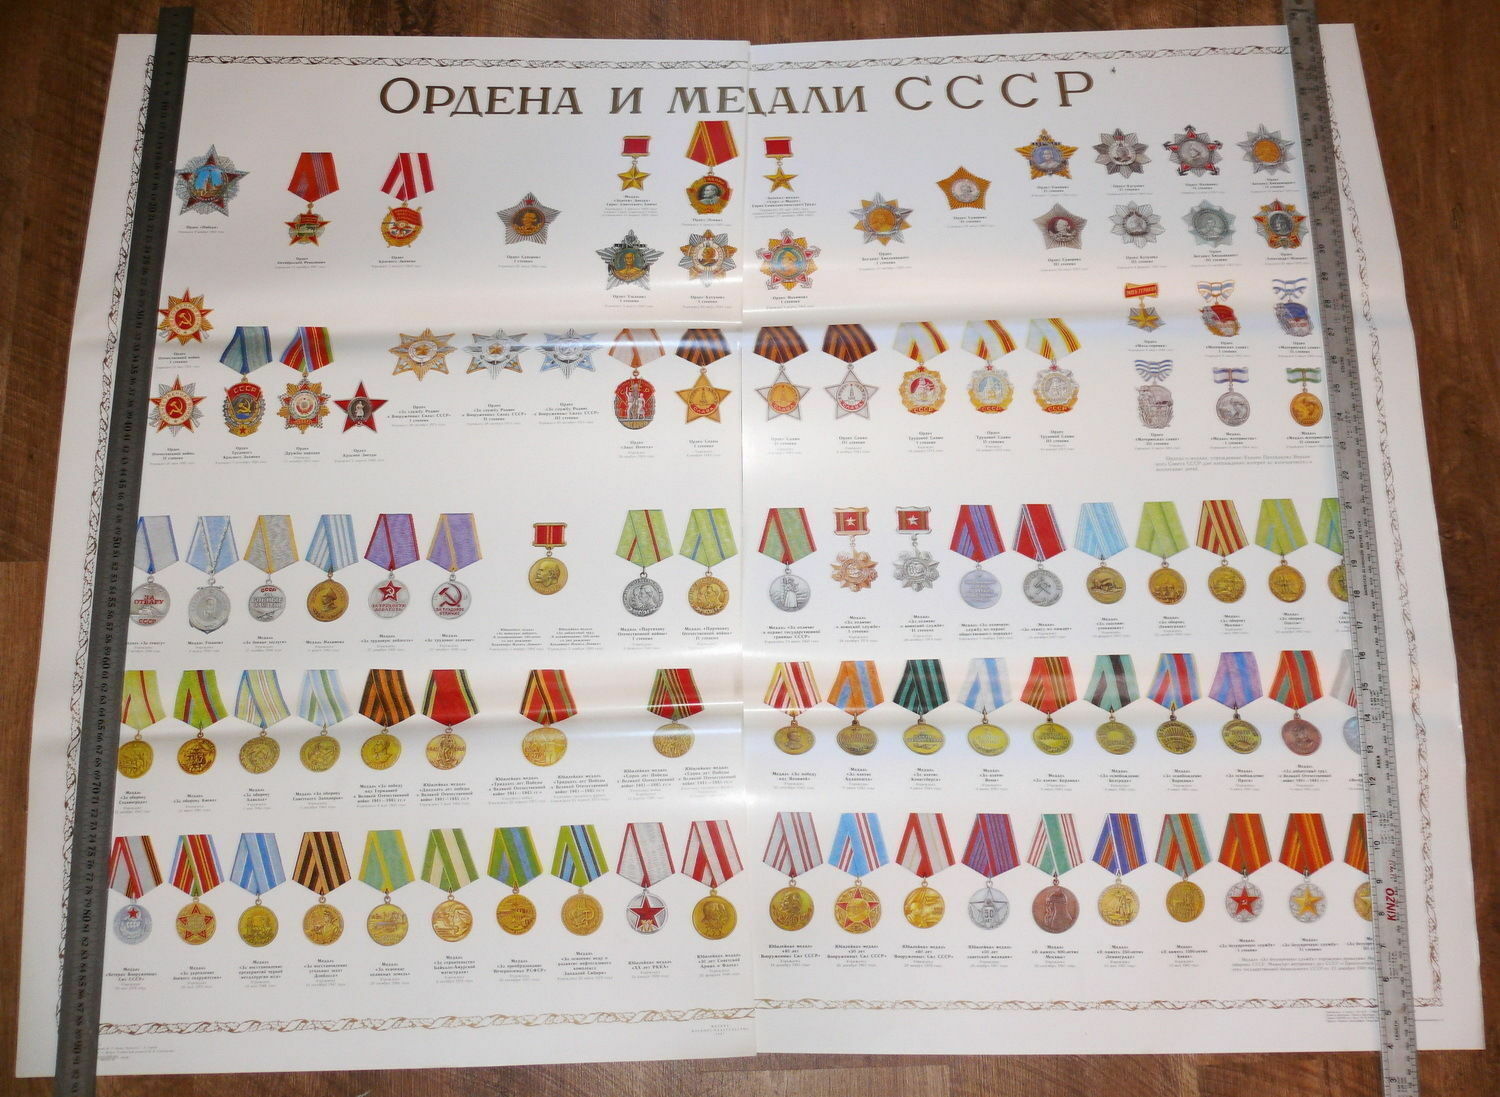 Huge Authentic Soviet USSR Double Poster Medals, Orders & Awards of Soviet Union